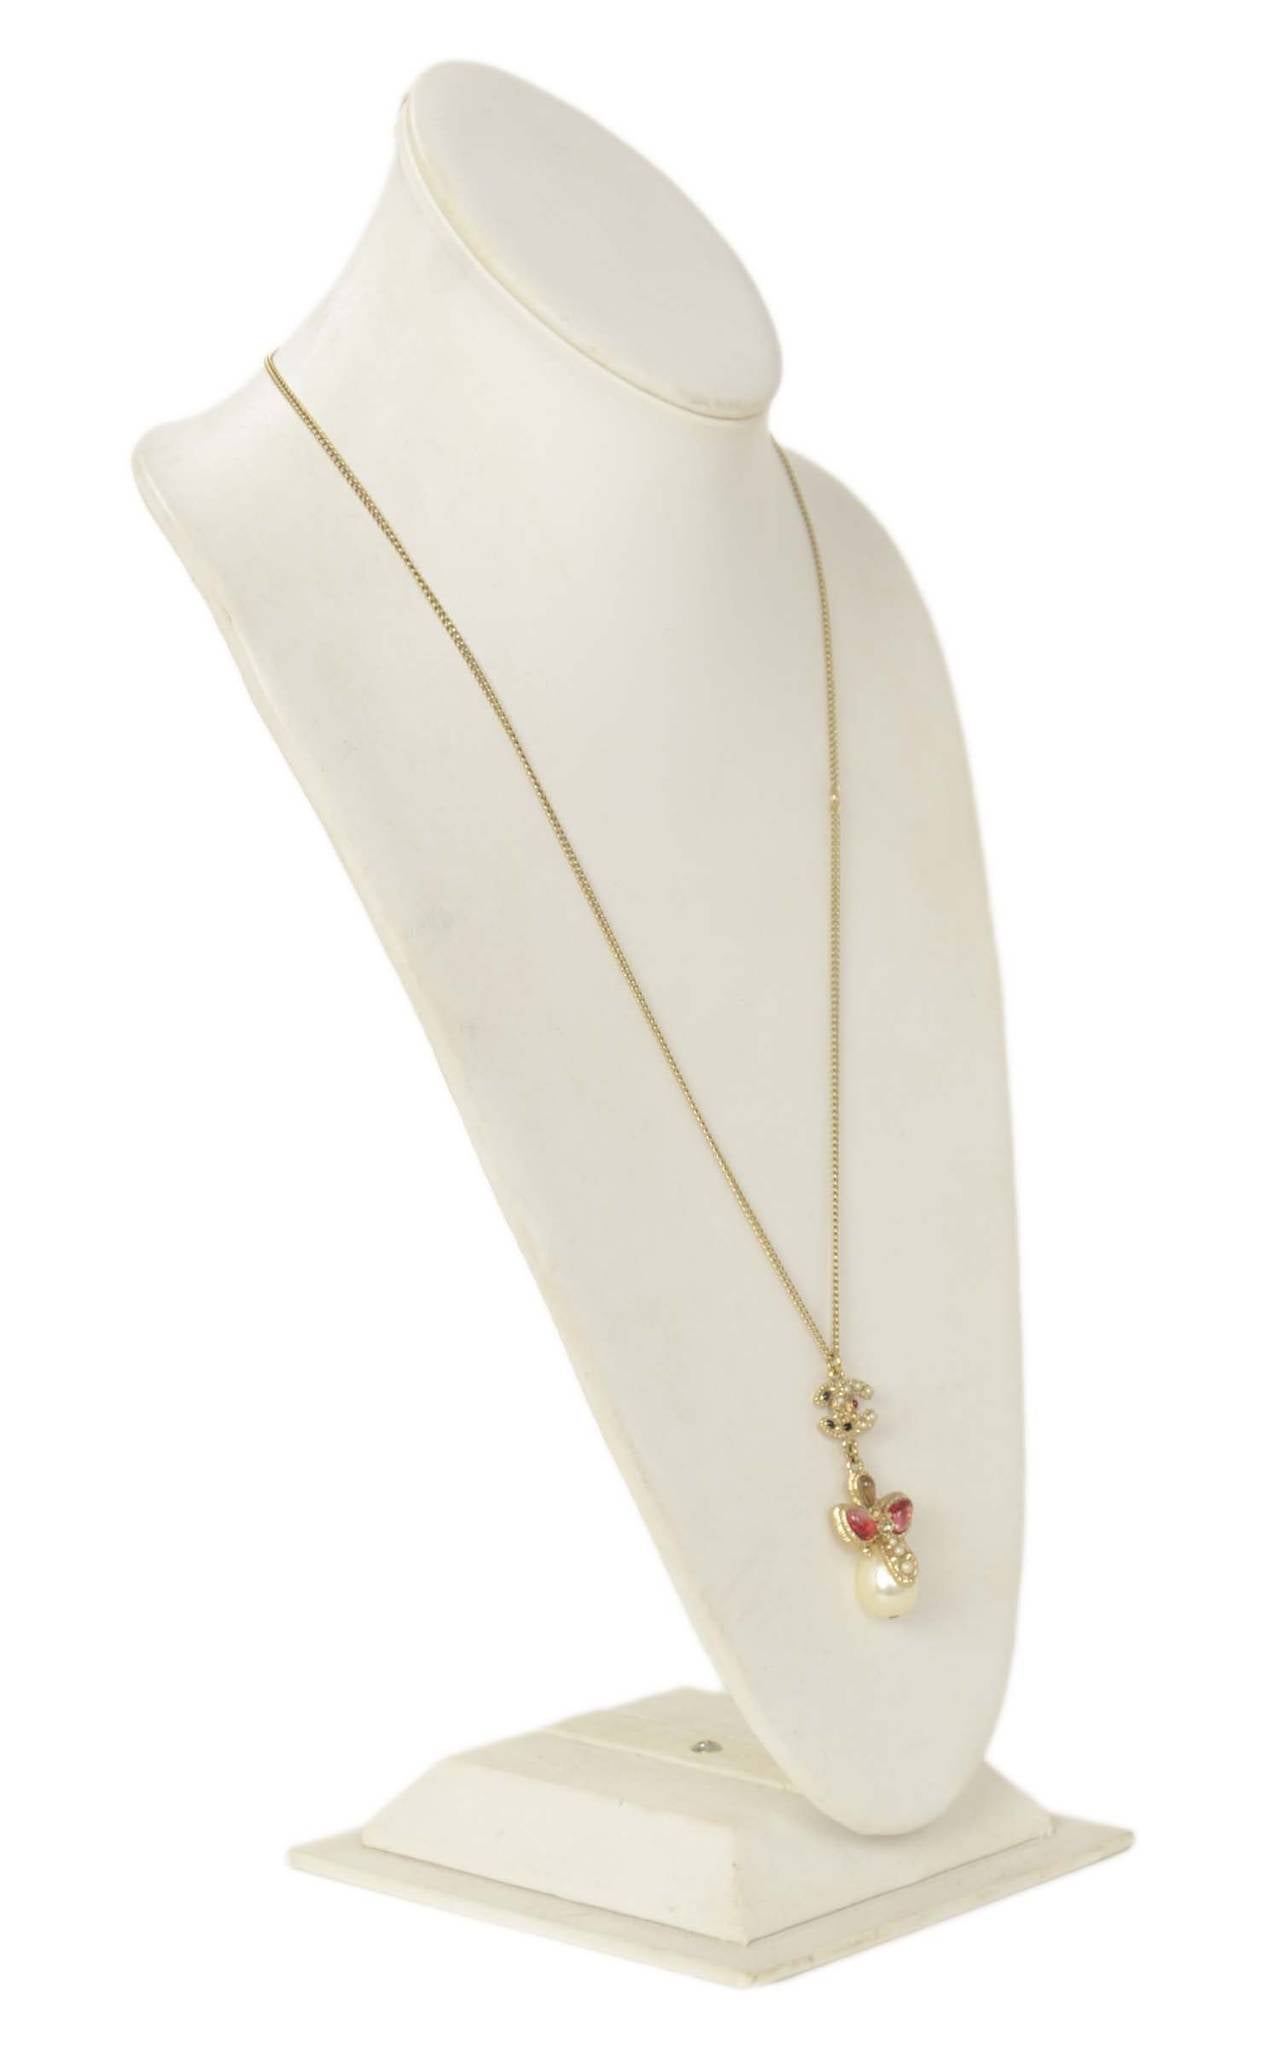 Features CC with pearls, black and burgundy enamel and a small rhinestone. Flower style pendant with red and taupe glass and faux pear tear drop. Necklace has two hooks allowing the owner to wear it shorter or longer.

-Made in: Italy
-Year of